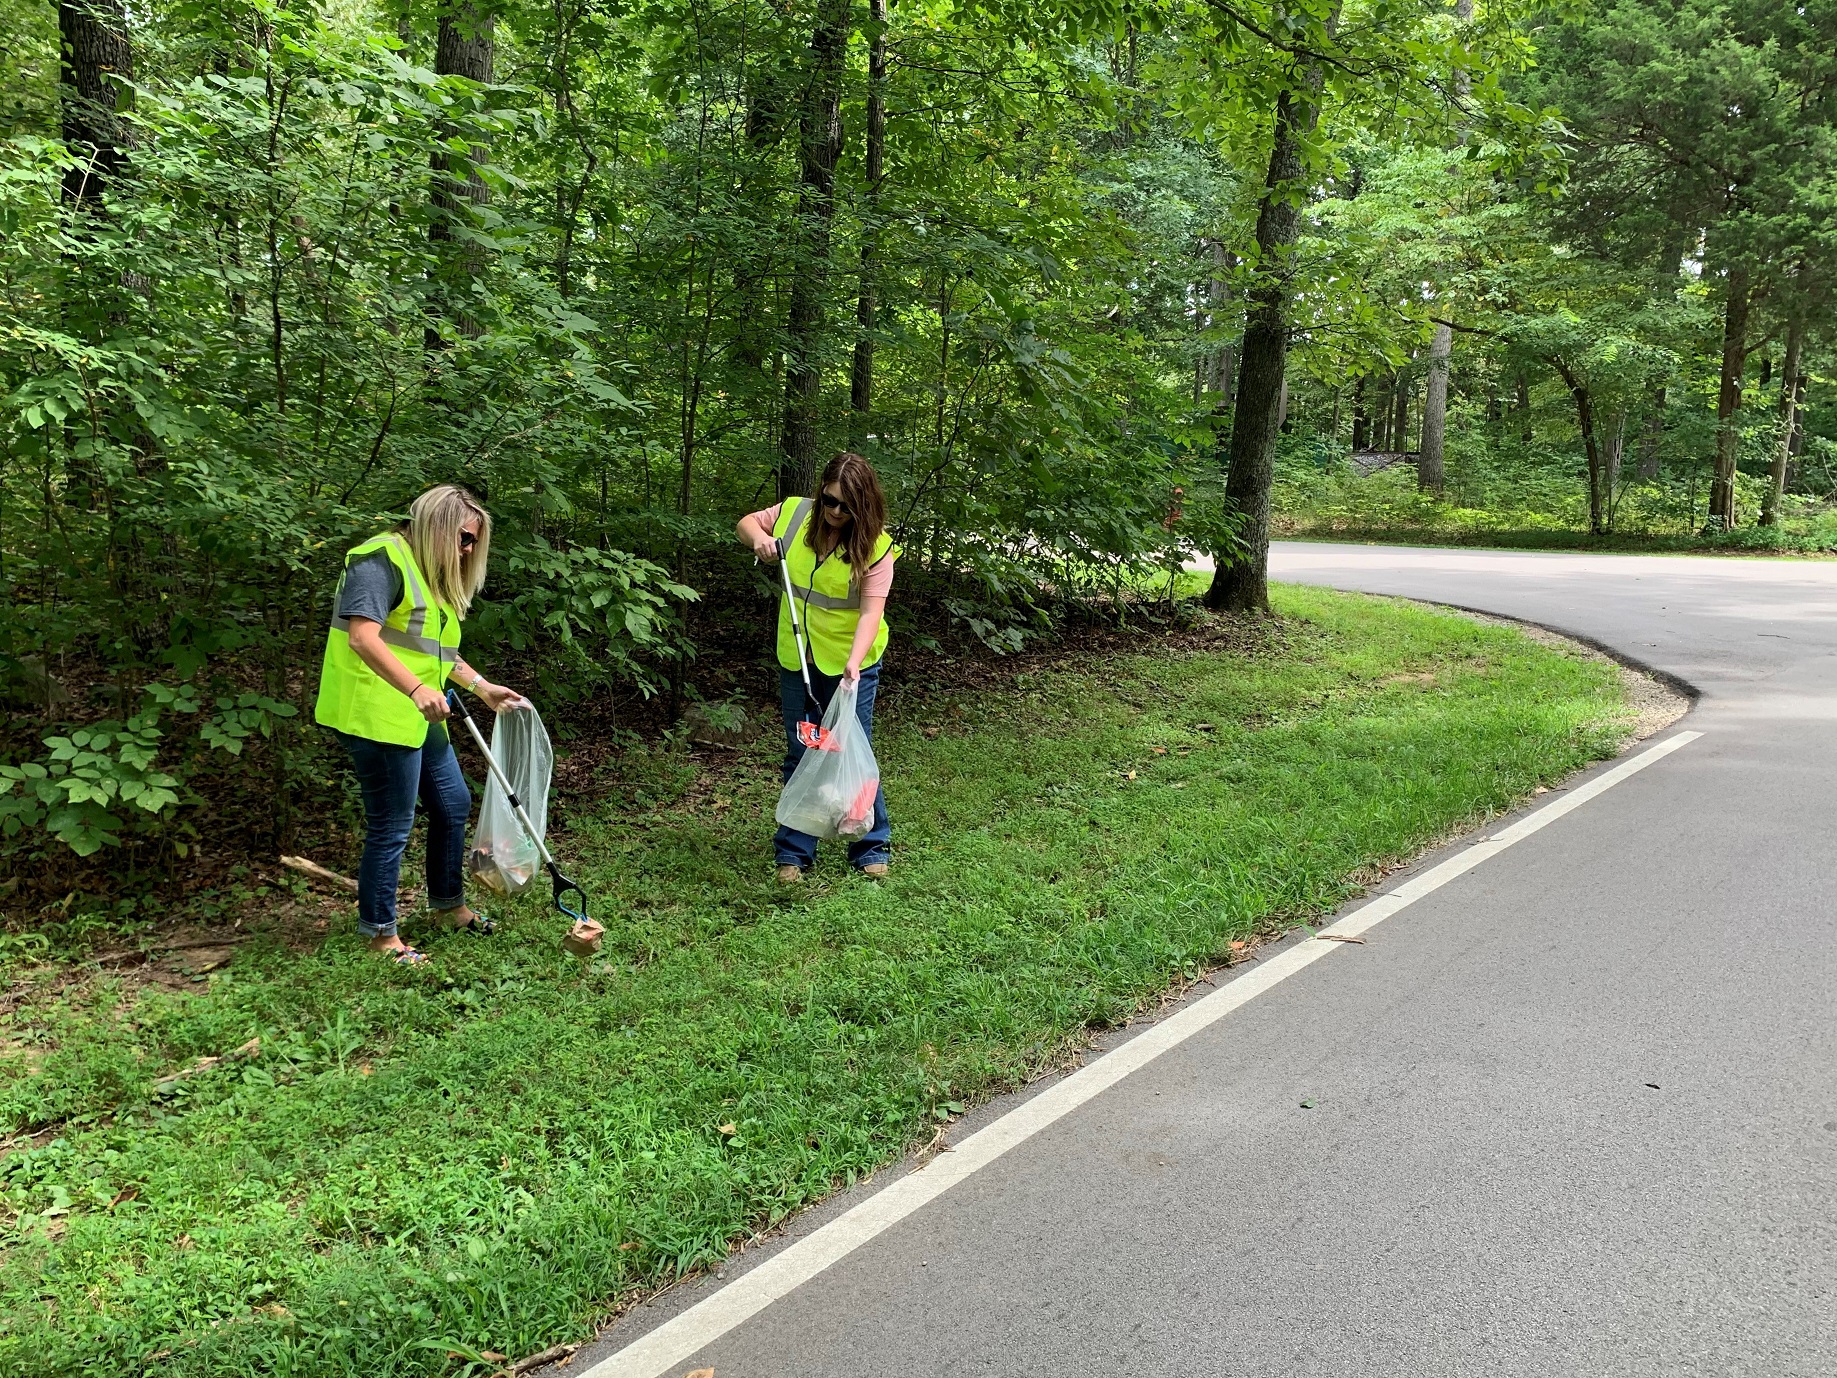 Two people in bright yellow vests use long poles to pick up paper and plastic trash items in a wooded area next to a road.